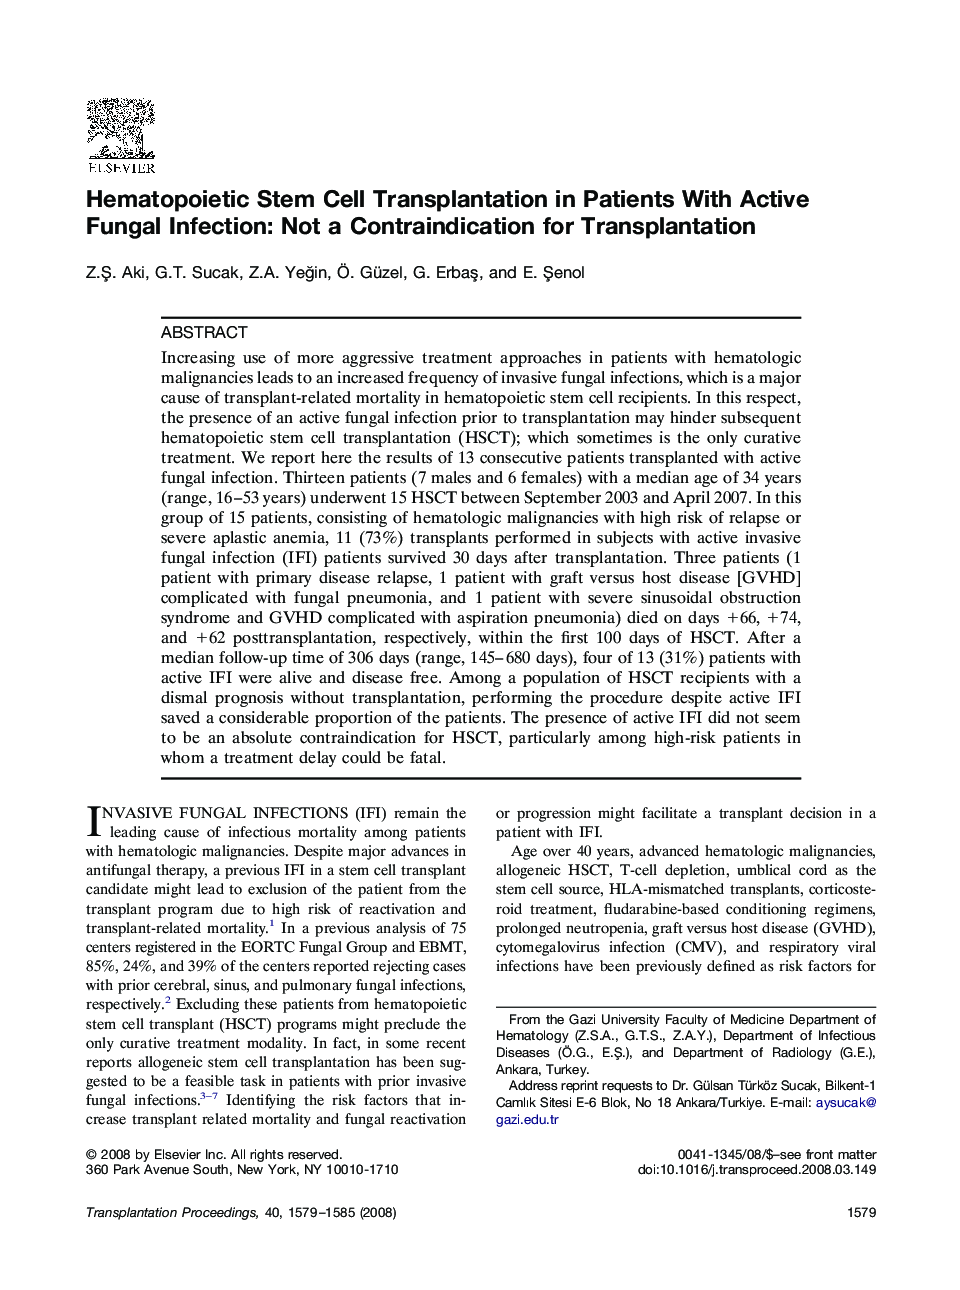 Hematopoietic Stem Cell Transplantation in Patients With Active Fungal Infection: Not a Contraindication for Transplantation